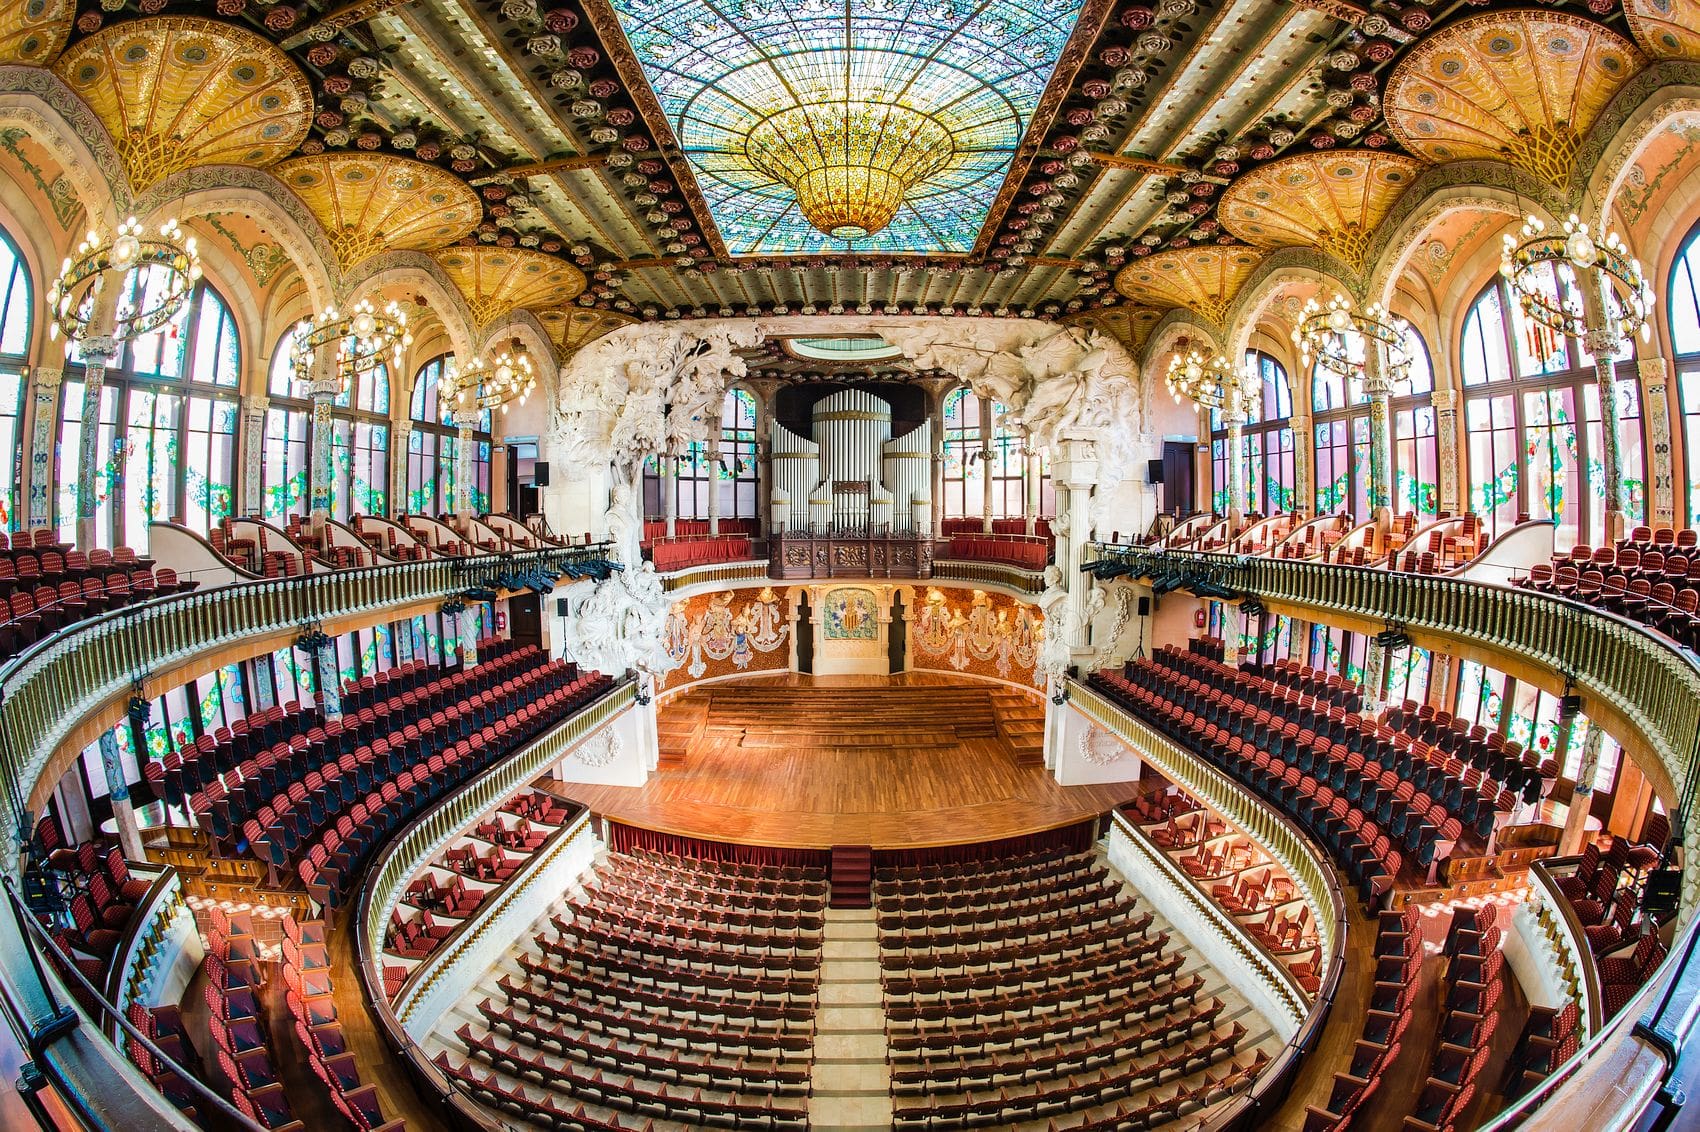 Concert Hall at the Palace of Catalan Music